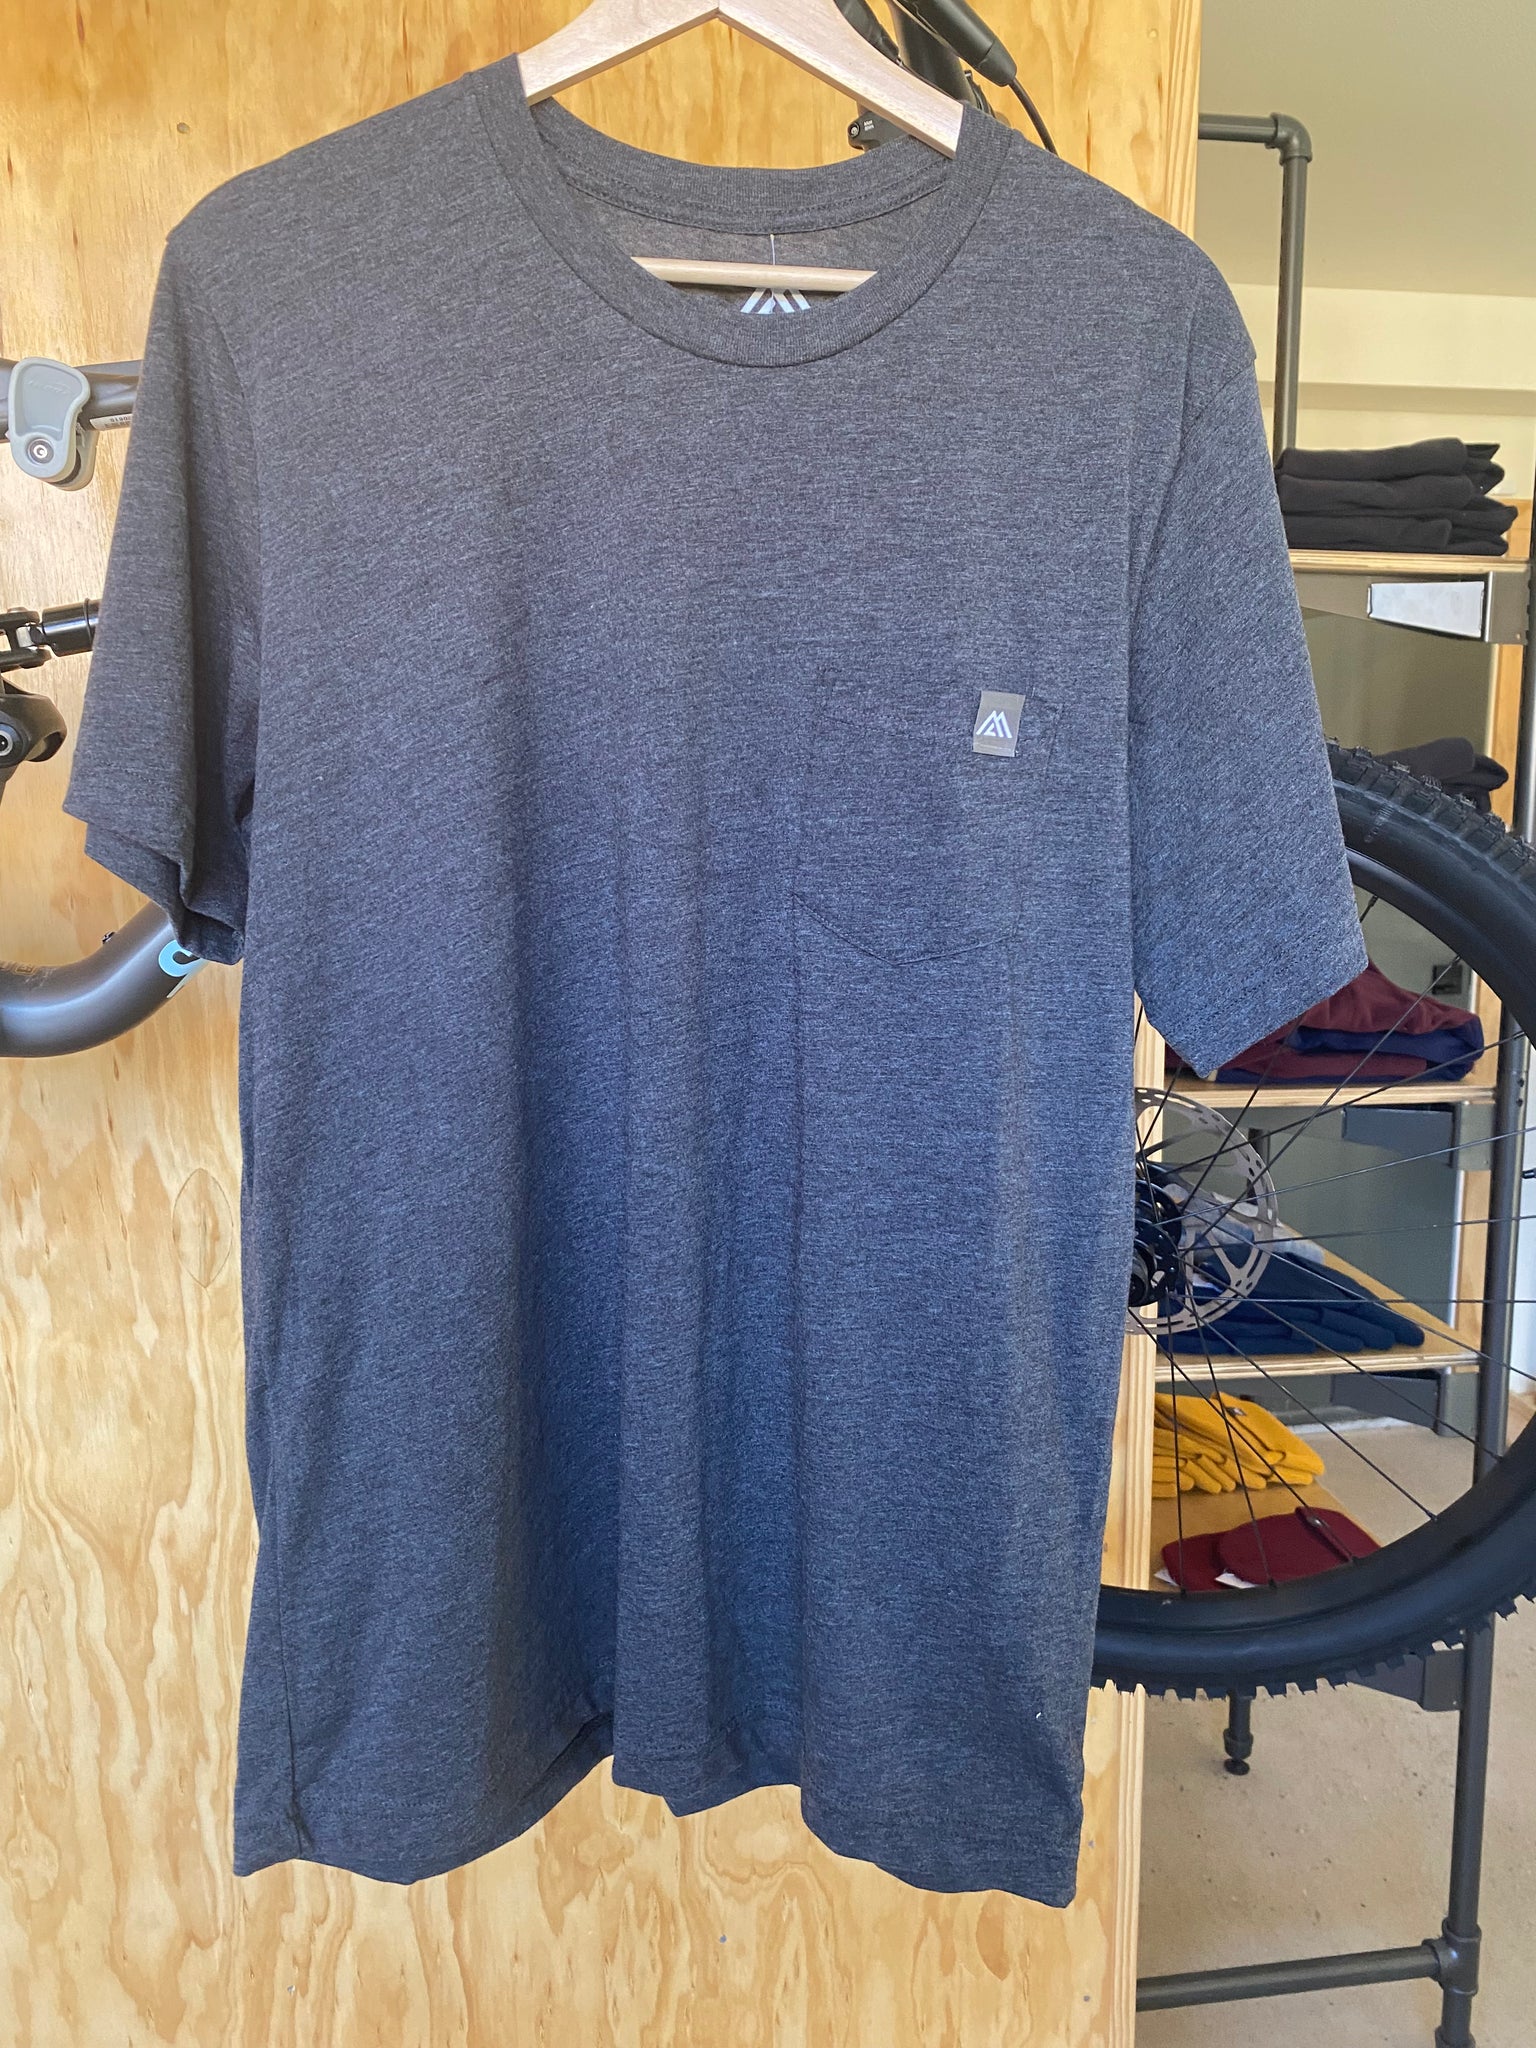 Soft Grey shirt with pocket and Logo print on back